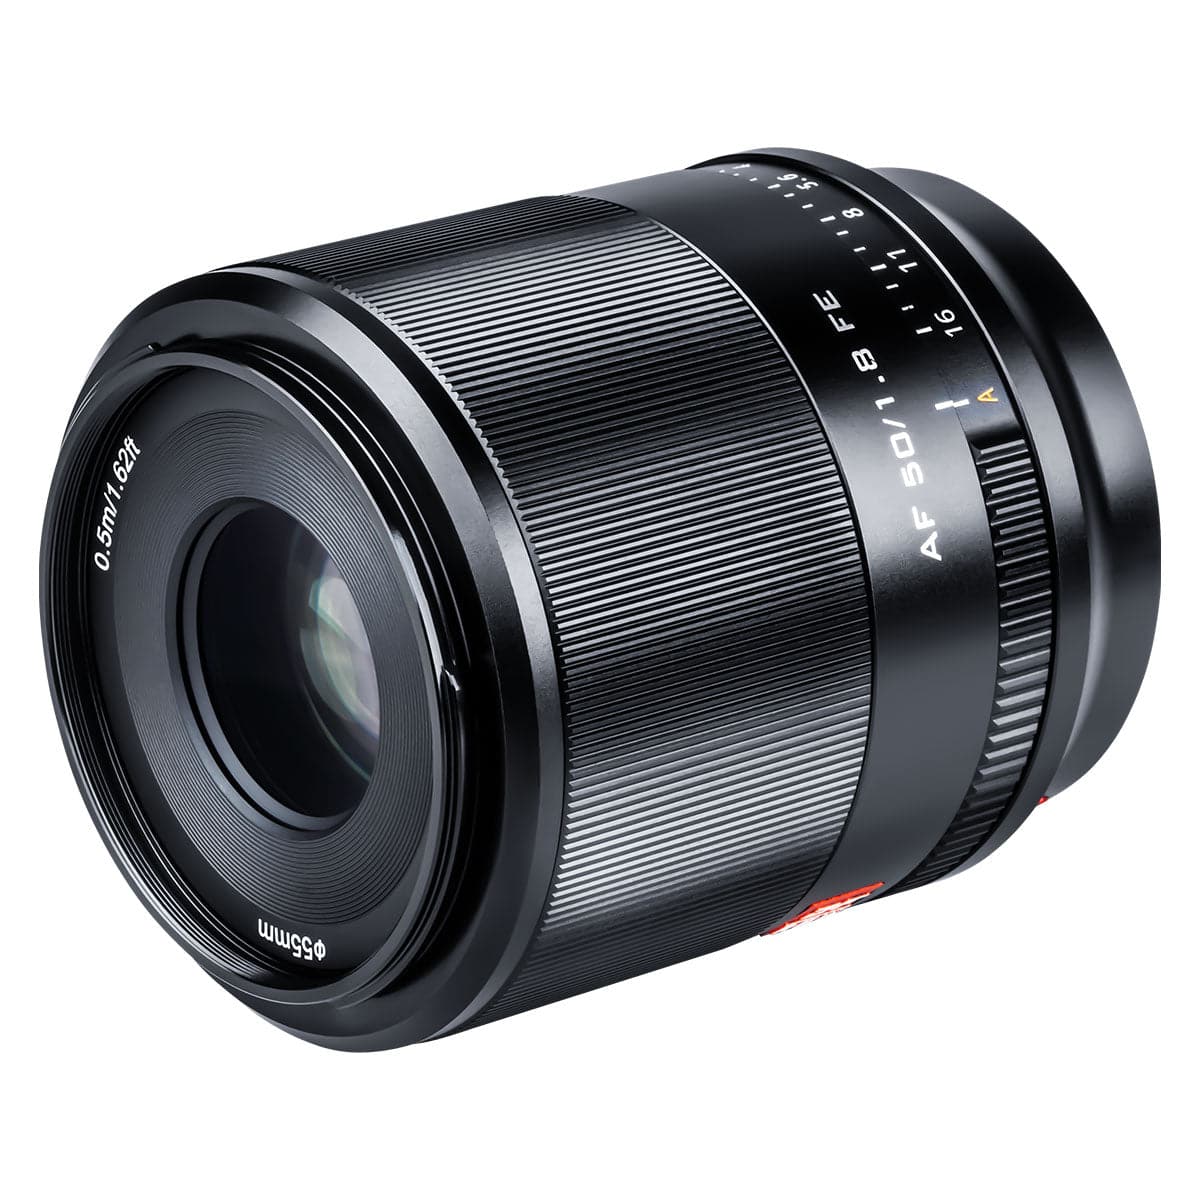 Viltrox 50mm f/1.8 Prime Lens Review for Sony E Mount - Whoa!